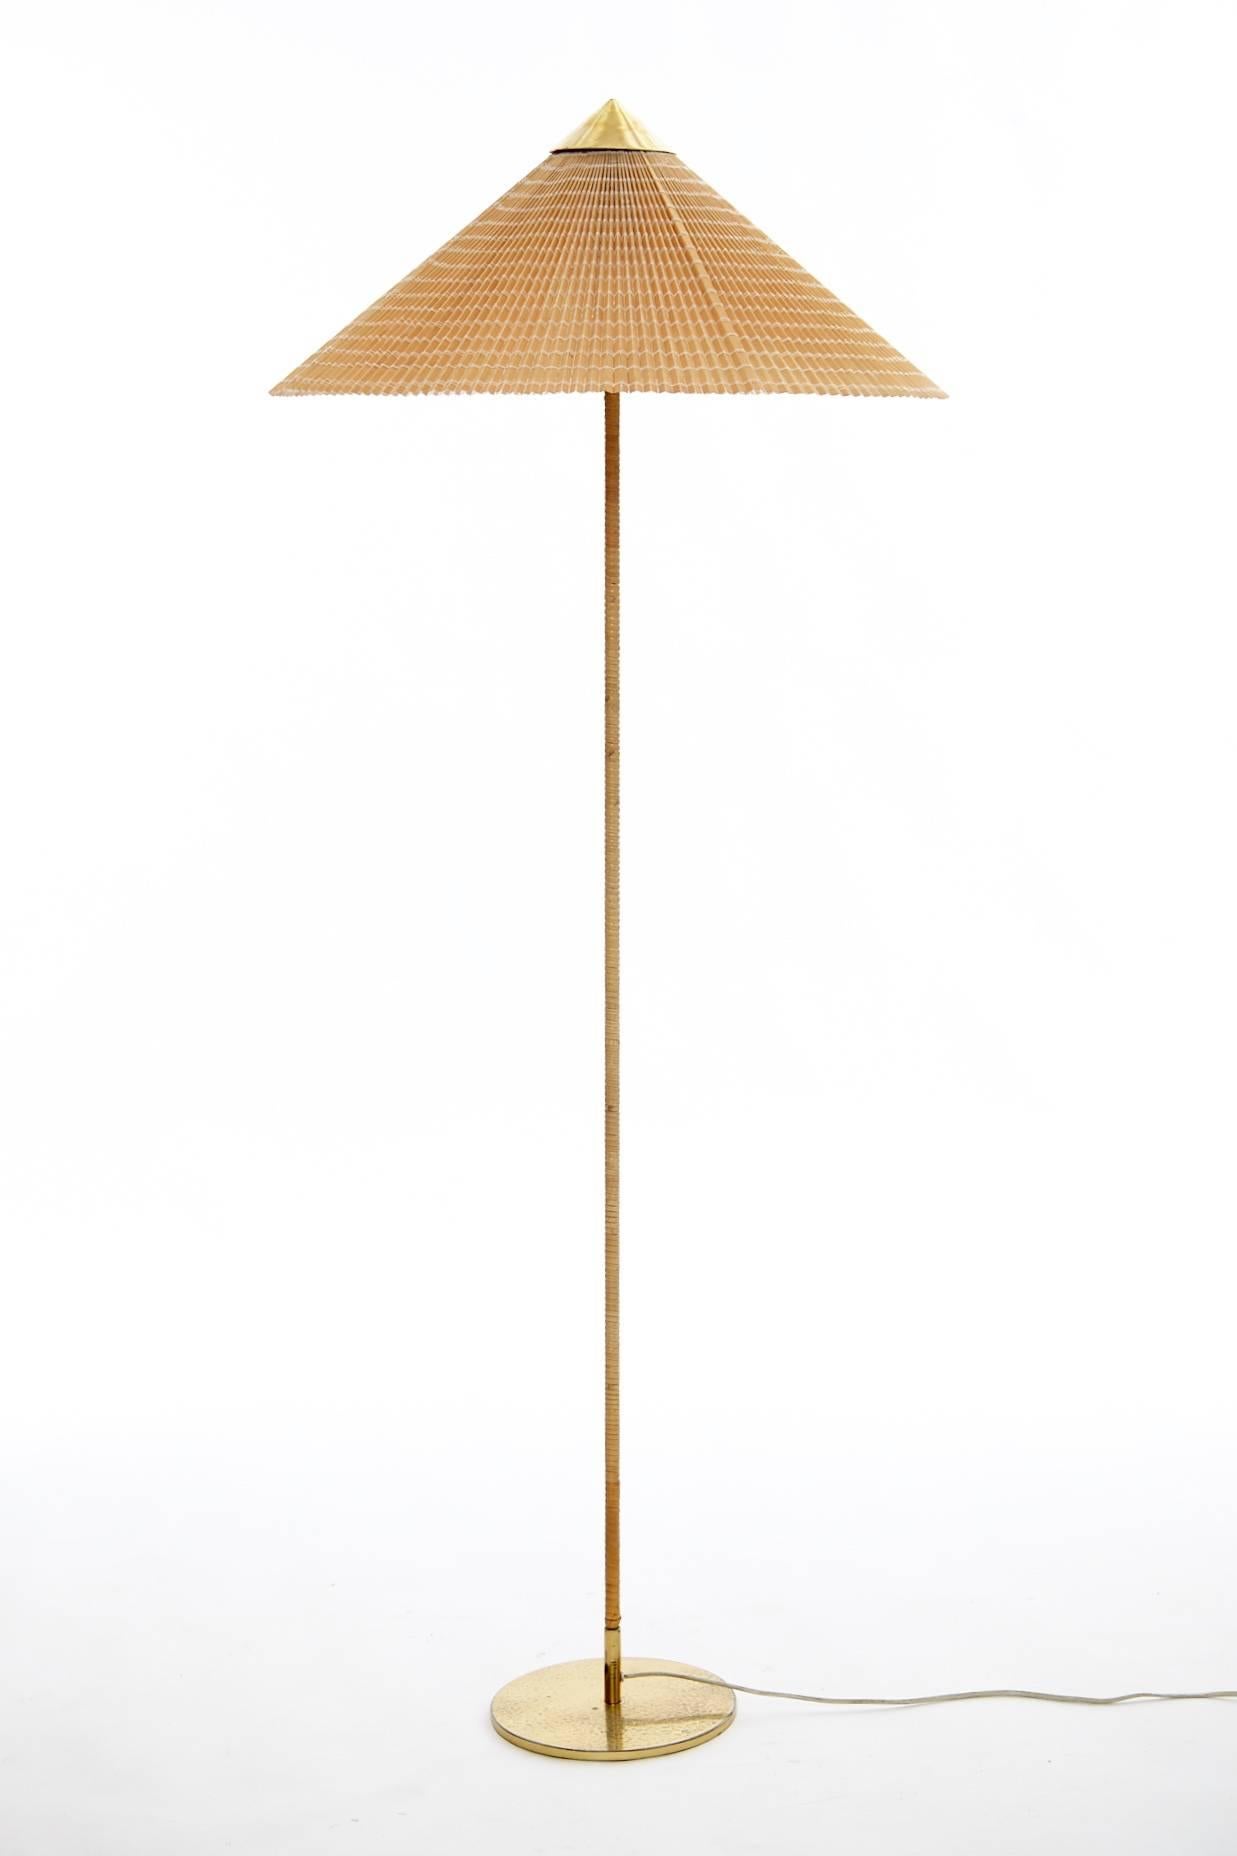 Paavo Tynell floor lamp, model 9602, for Taito or Idman, Finland, circa 1940s.
Solid brass, metal, original rattan and later shade.  Unmarked.